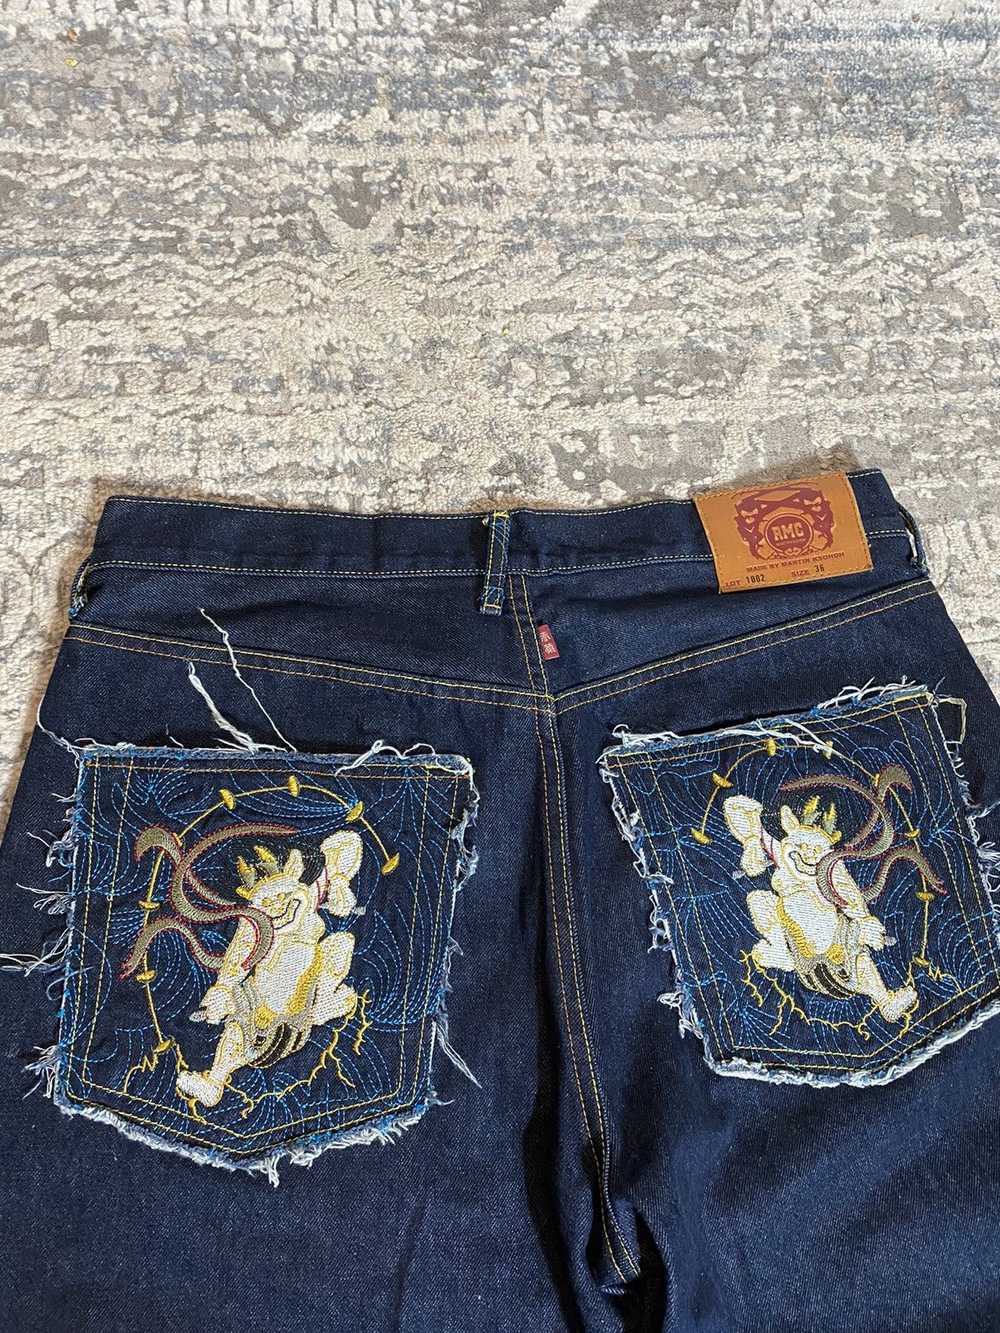 Japanese Brand × RED MONKEY RMC JEANS - image 3